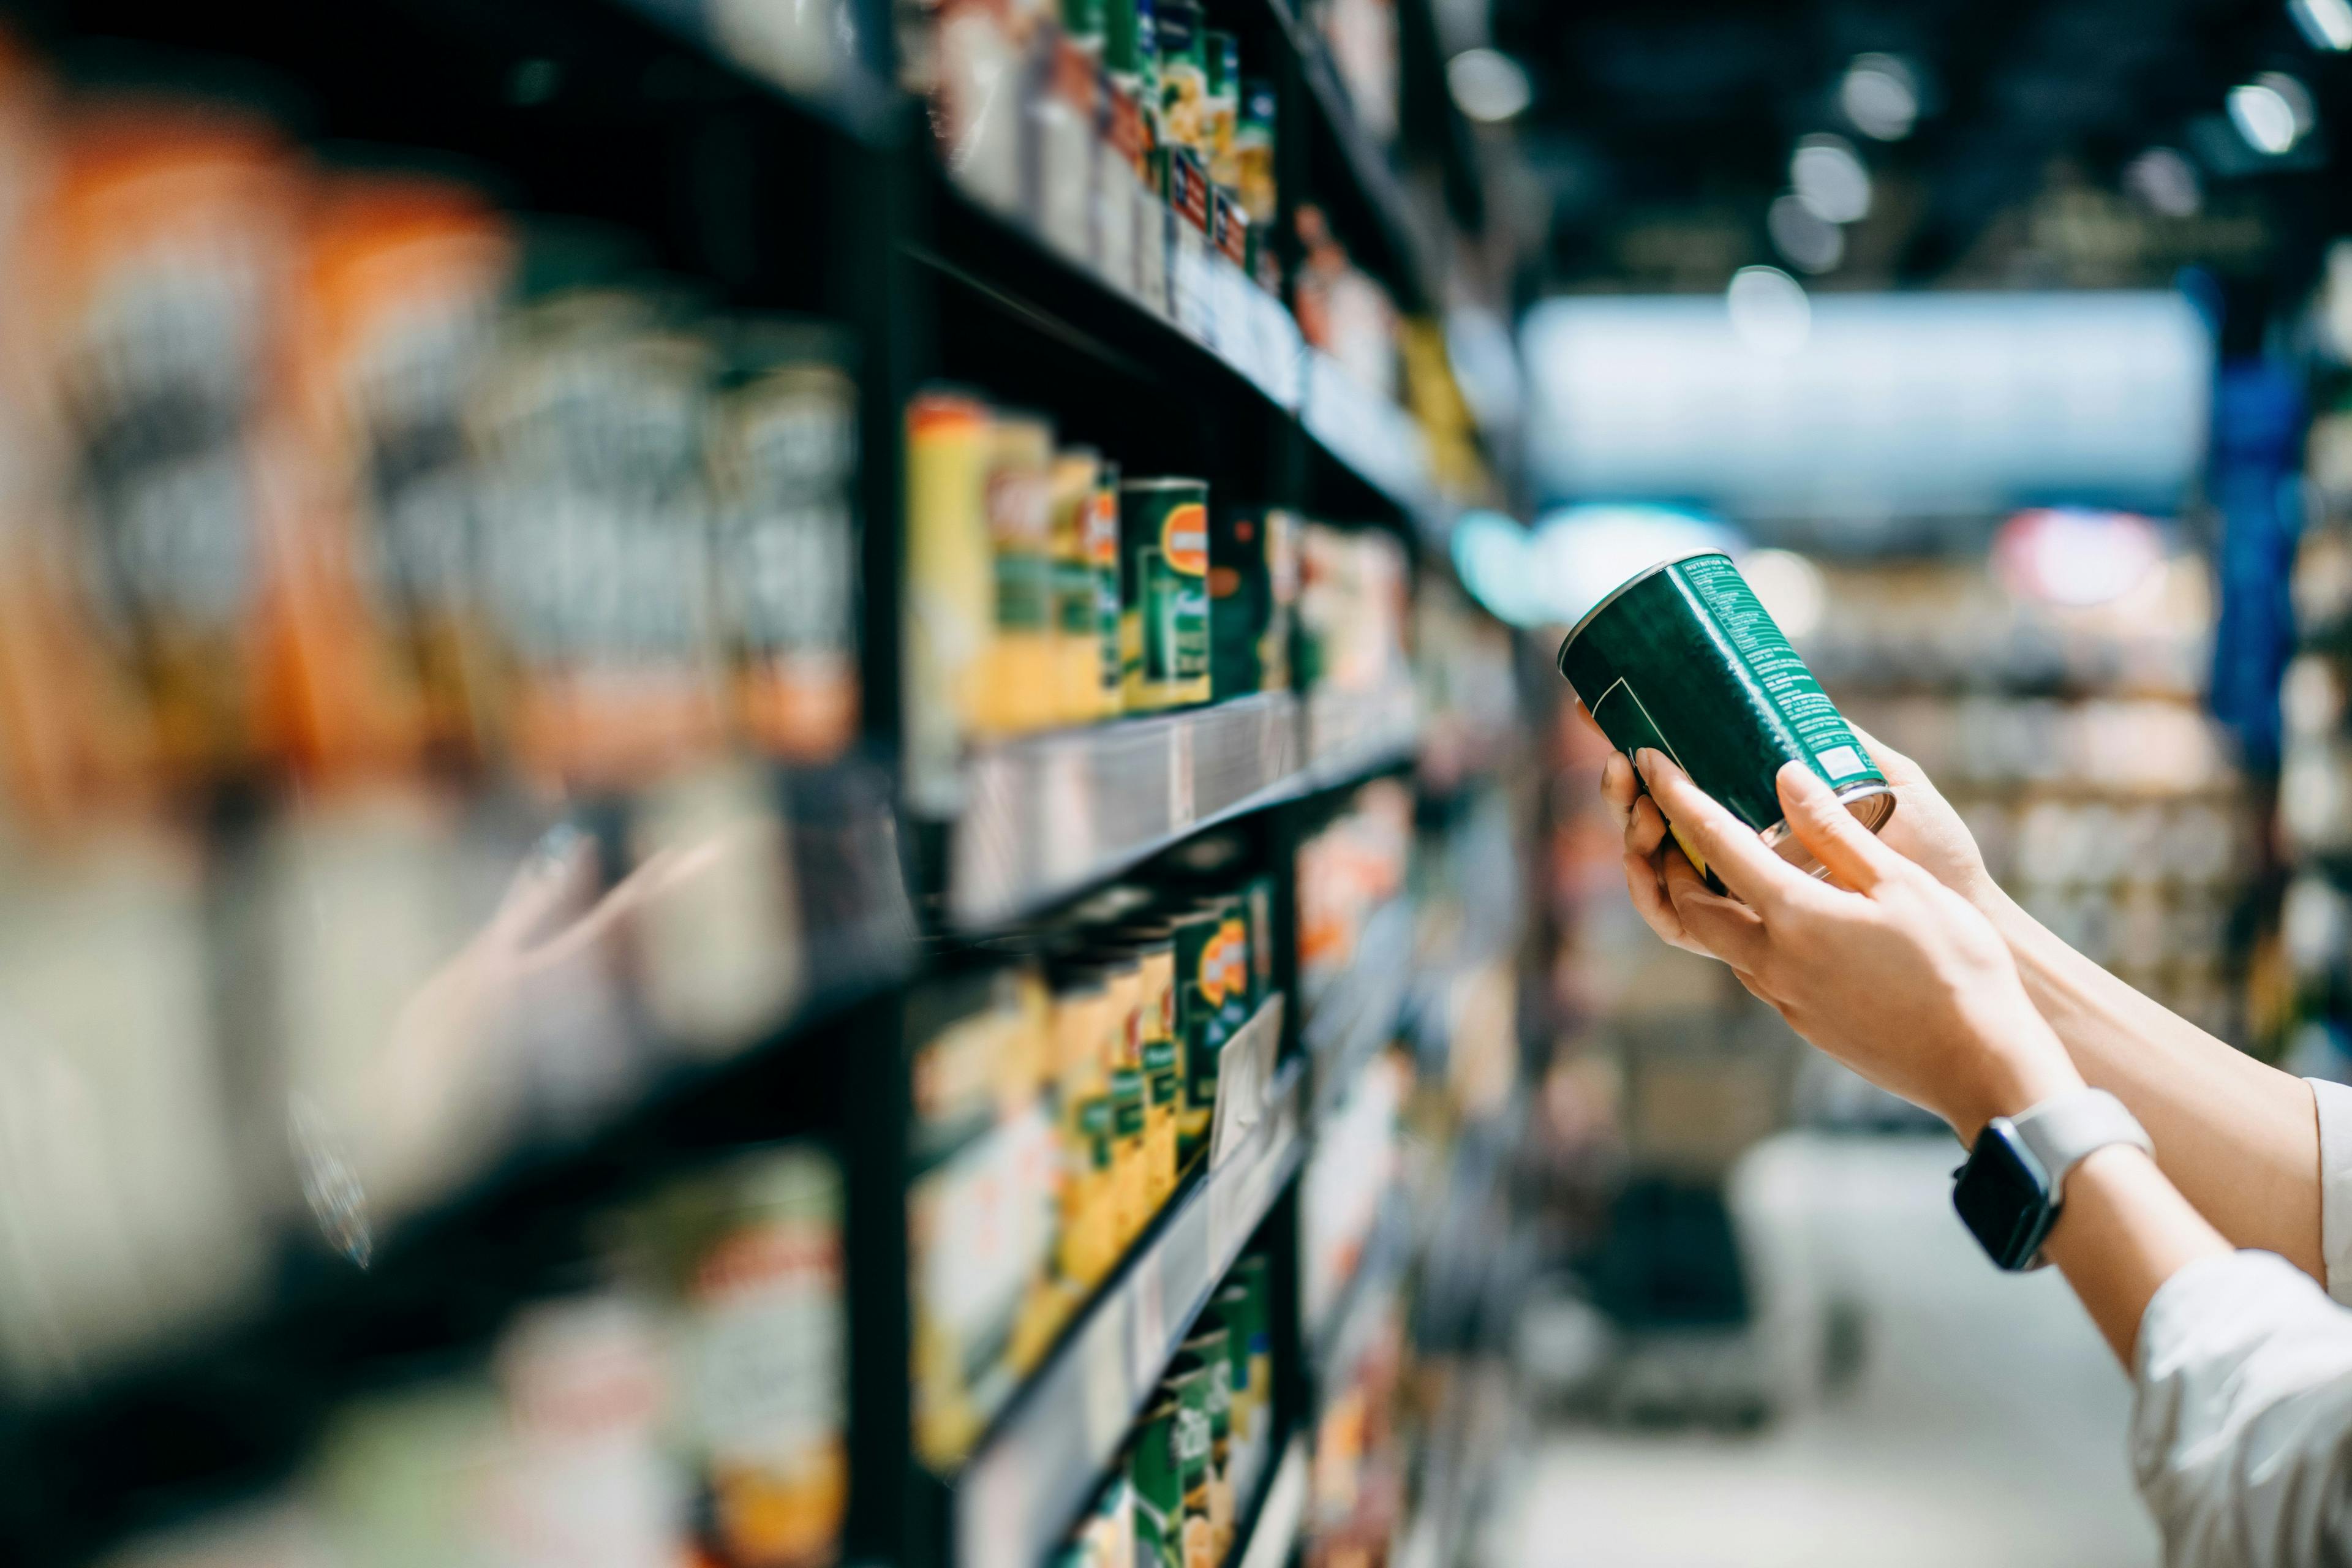 Hands of person checking the label on a can in a grocery store aisle